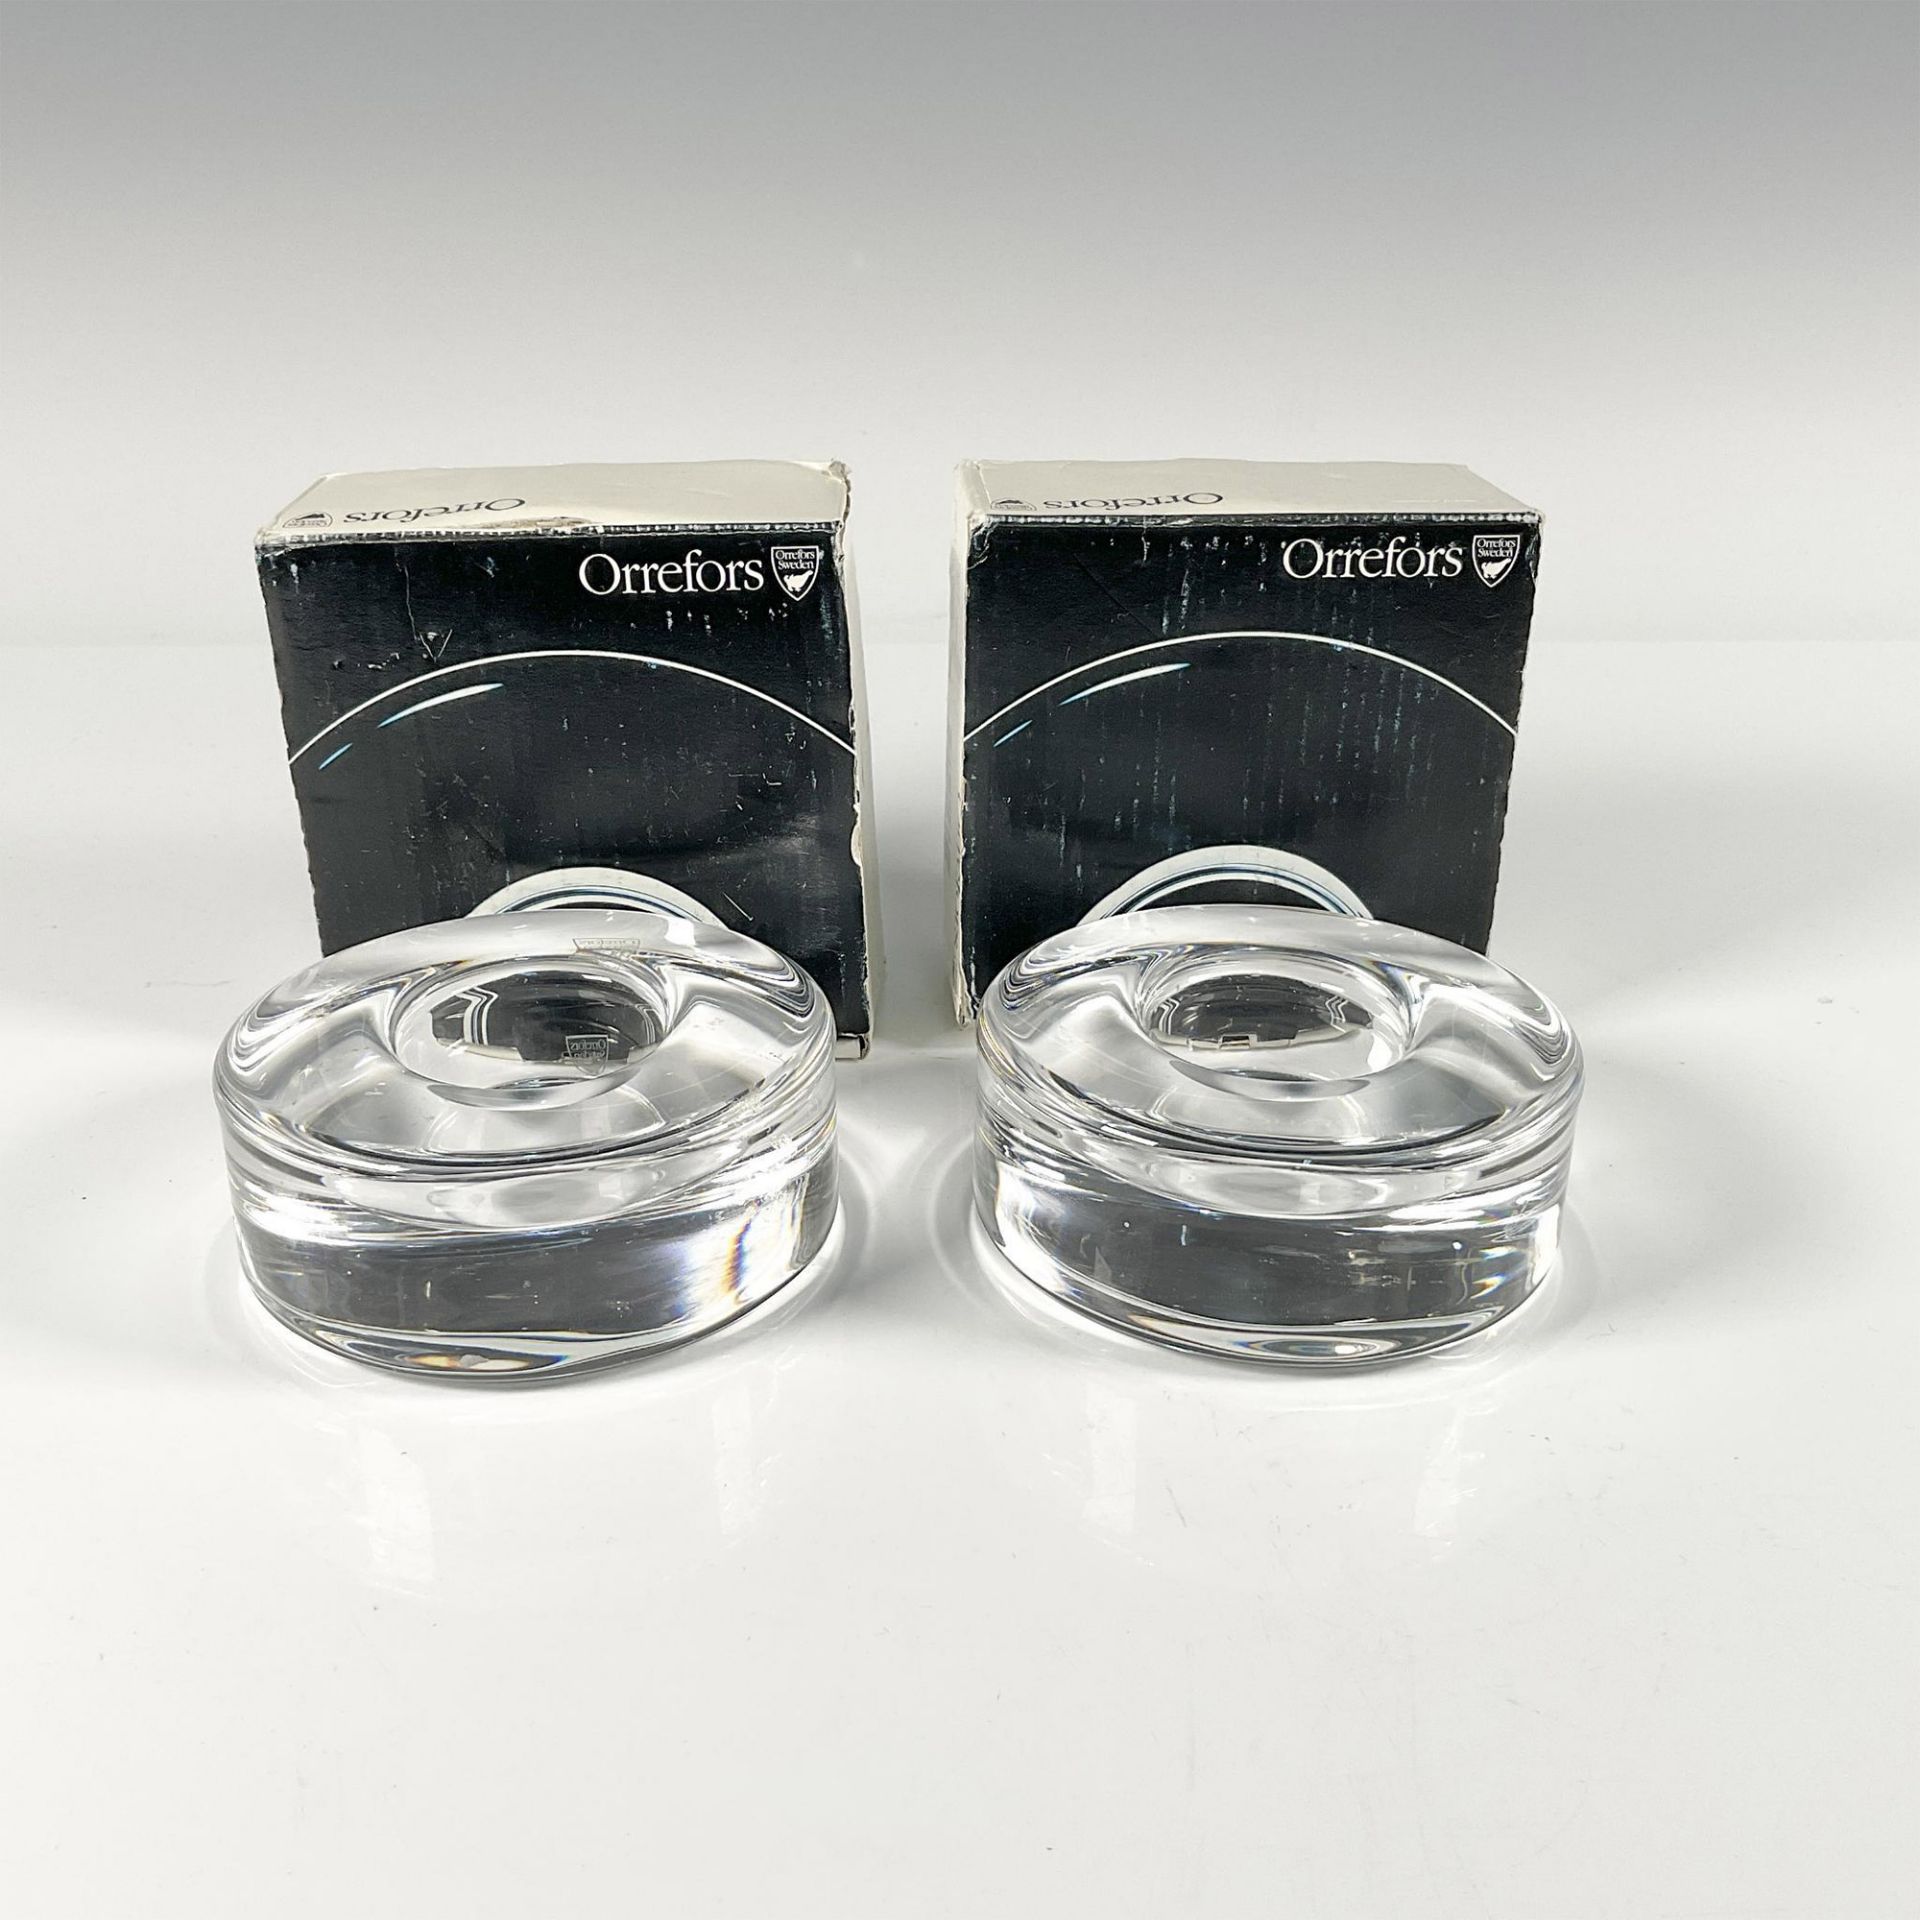 2pc Orrefors Crystal Candleholders, Puck - Image 4 of 4